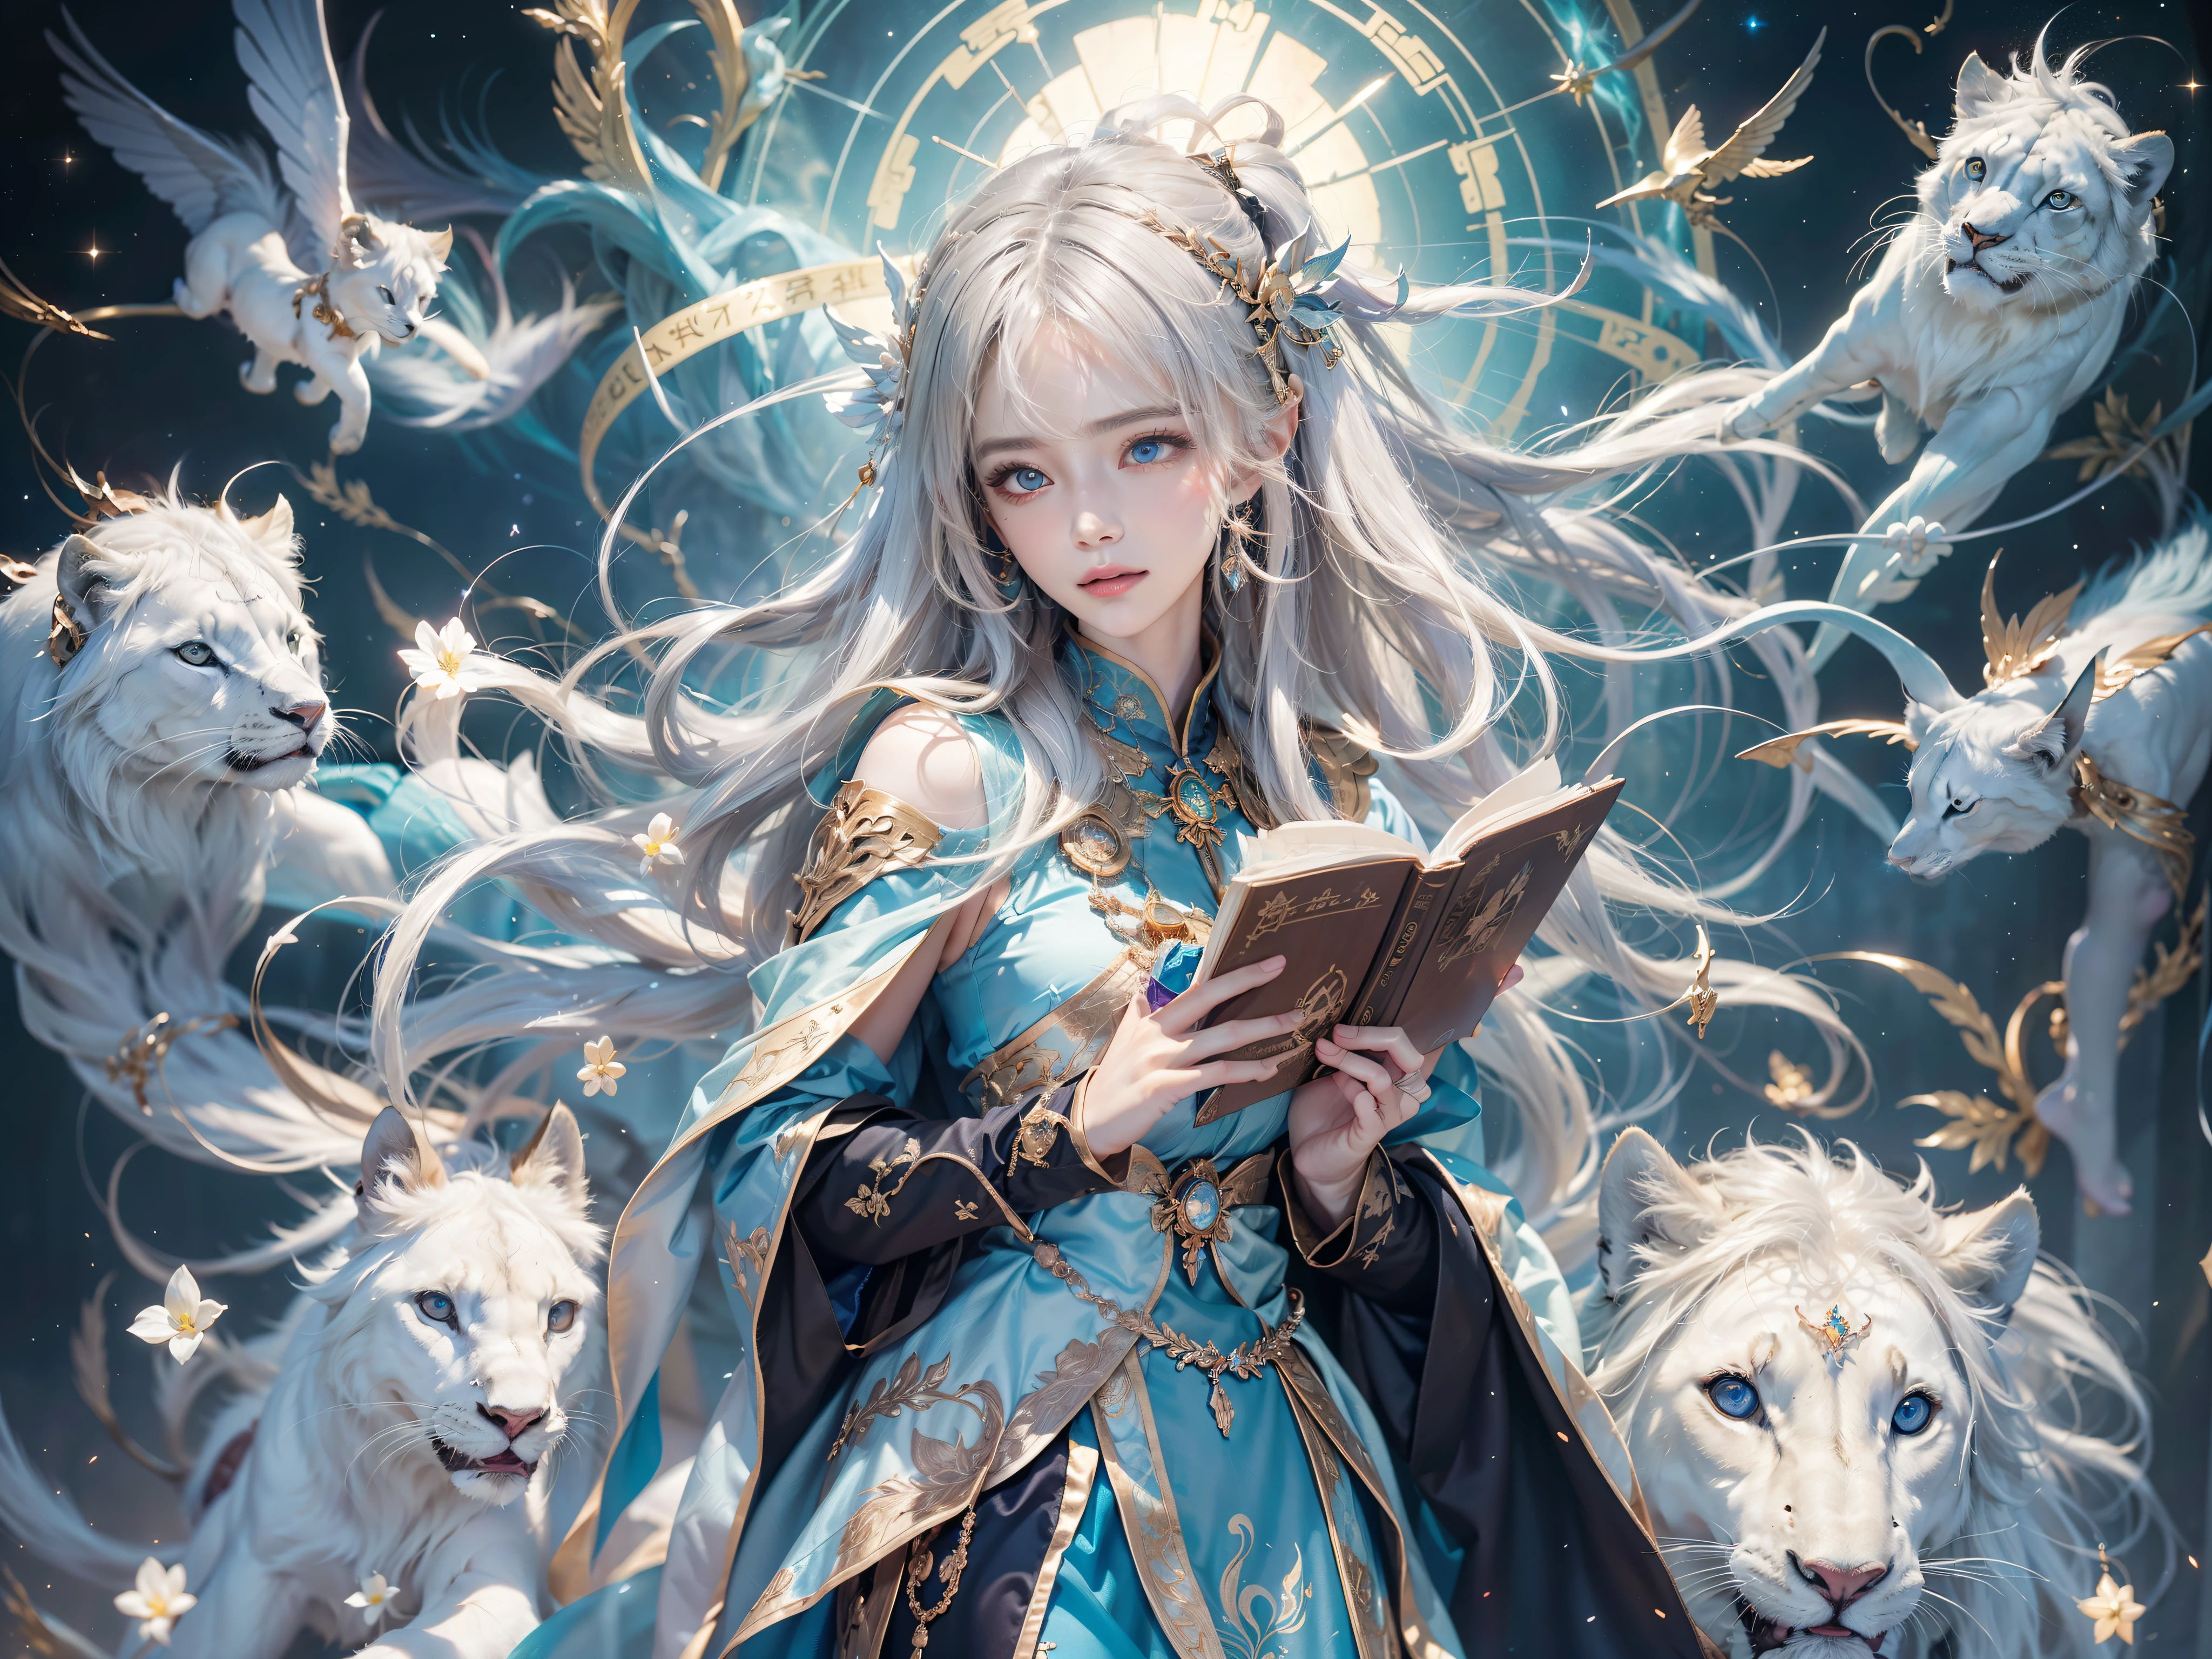 The crystal castle sealed by the magic book,Blood,night, dark, (fantasy),infinitude,dark blue sky,The abyss of knowledge,Cowlic,((on the table)), (((best quality))),((beautiful fine eyes)),(eyelash)、Beautiful girl rides huge white lion，Wear armor、(1 girl)、The perfect human structure、Black Hair Flying in the Wind、long hair、abyss eyes、shiny skin、oil、small 、Wizard robes、in rags with、realistic jacket、tenchi、Super exquisite CG Unity 32k wallpaper、​Masterpiece, ((Super detailed)), ((Enlightenment)),Colorful,wallpaper,energy,Unknown terror,difficult to understand,around magic,magical environment,Magic wand,This book,Flight page,know everything,Predicting the Future、Learn about the past、Unlimited wisdom、blue flame、Warlock、magic circle、five-pointed star、spell、mantra、Sing magic